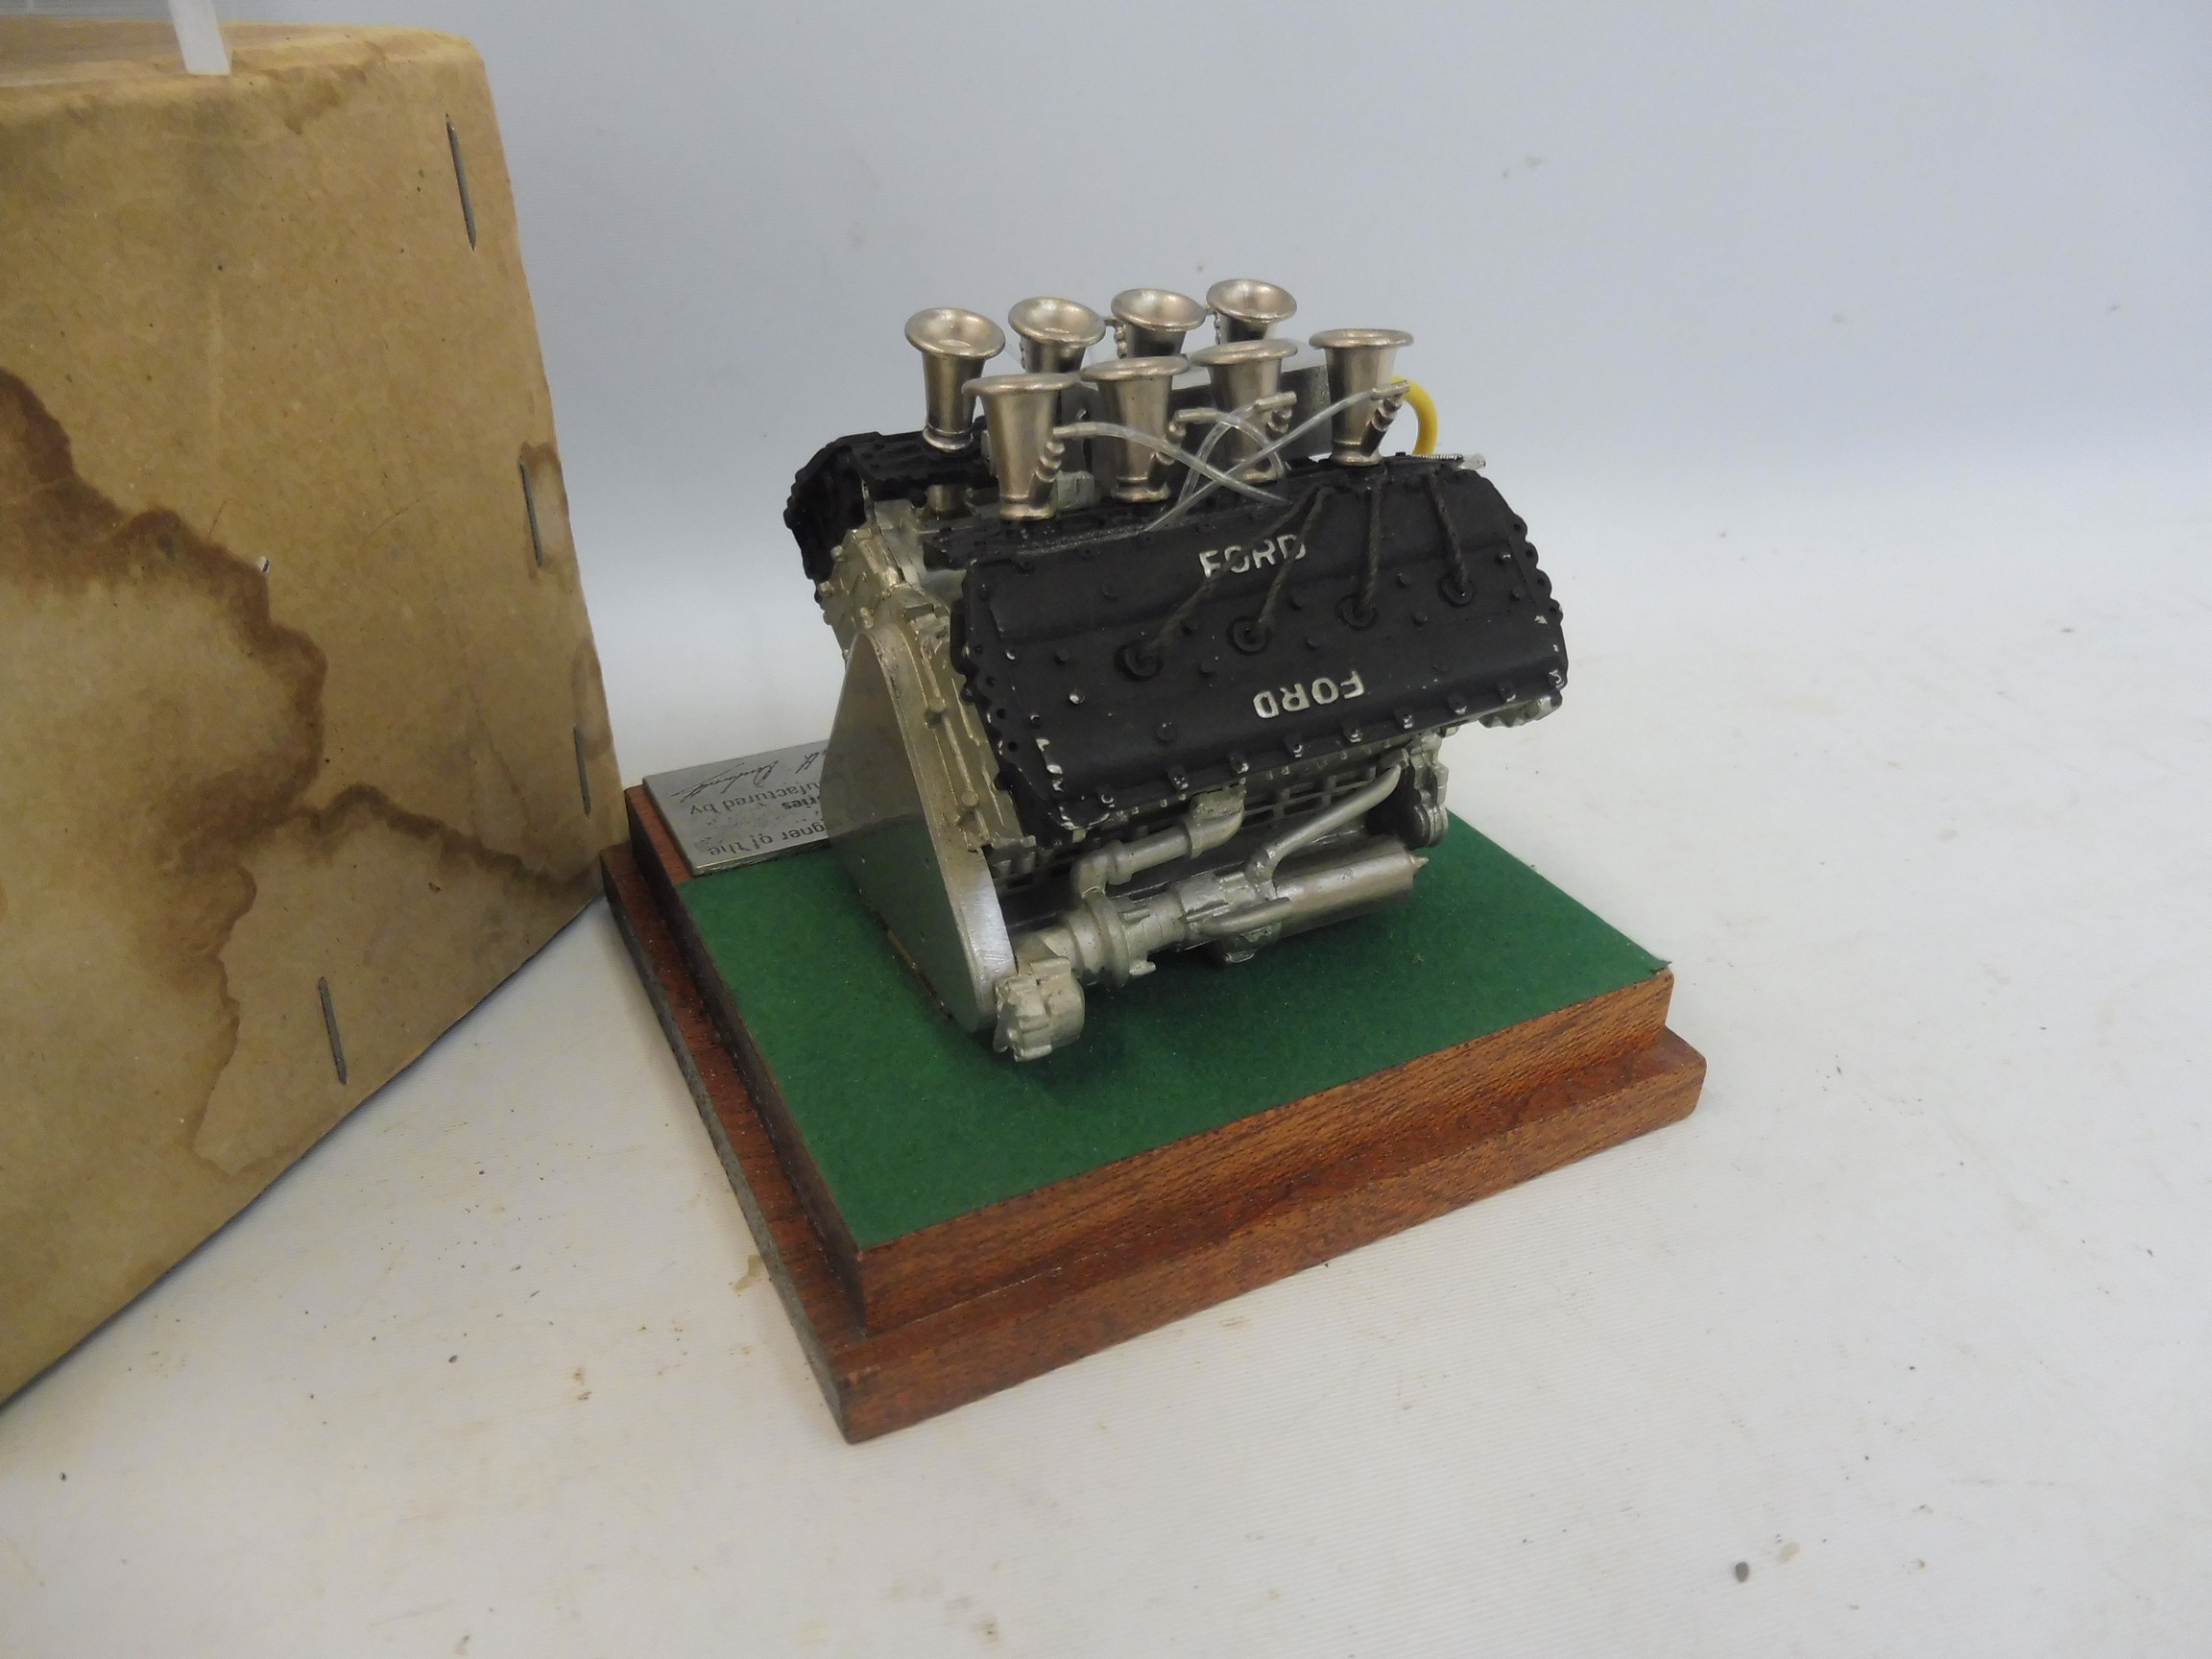 A Keith Duckworth (designer of DFV Ford Cosworth engine) limited edition scale model of a Ford - Image 2 of 2